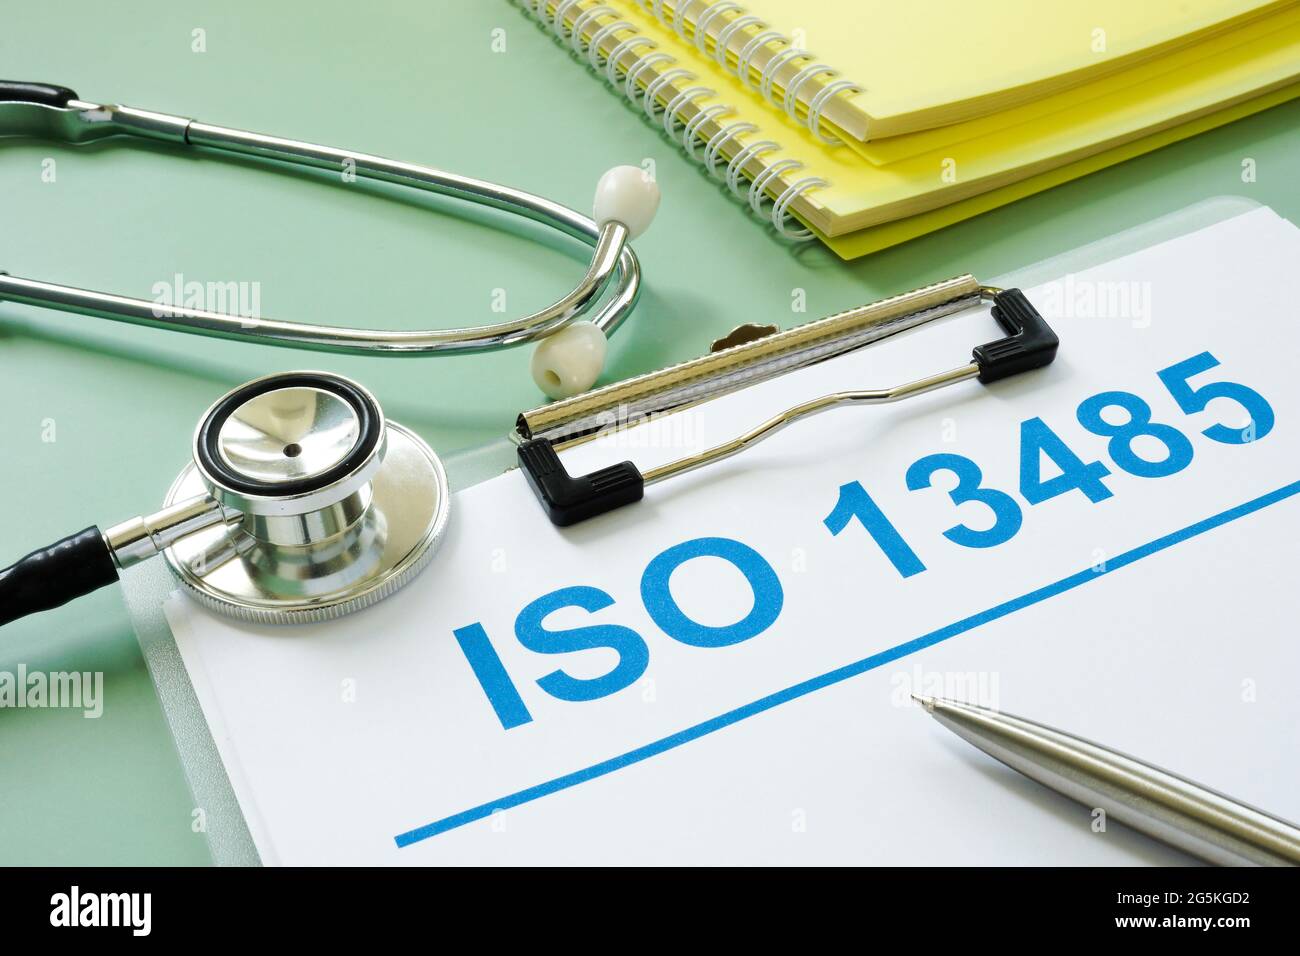 ISO 13458 documents and medical stethoscope with pen. Stock Photo